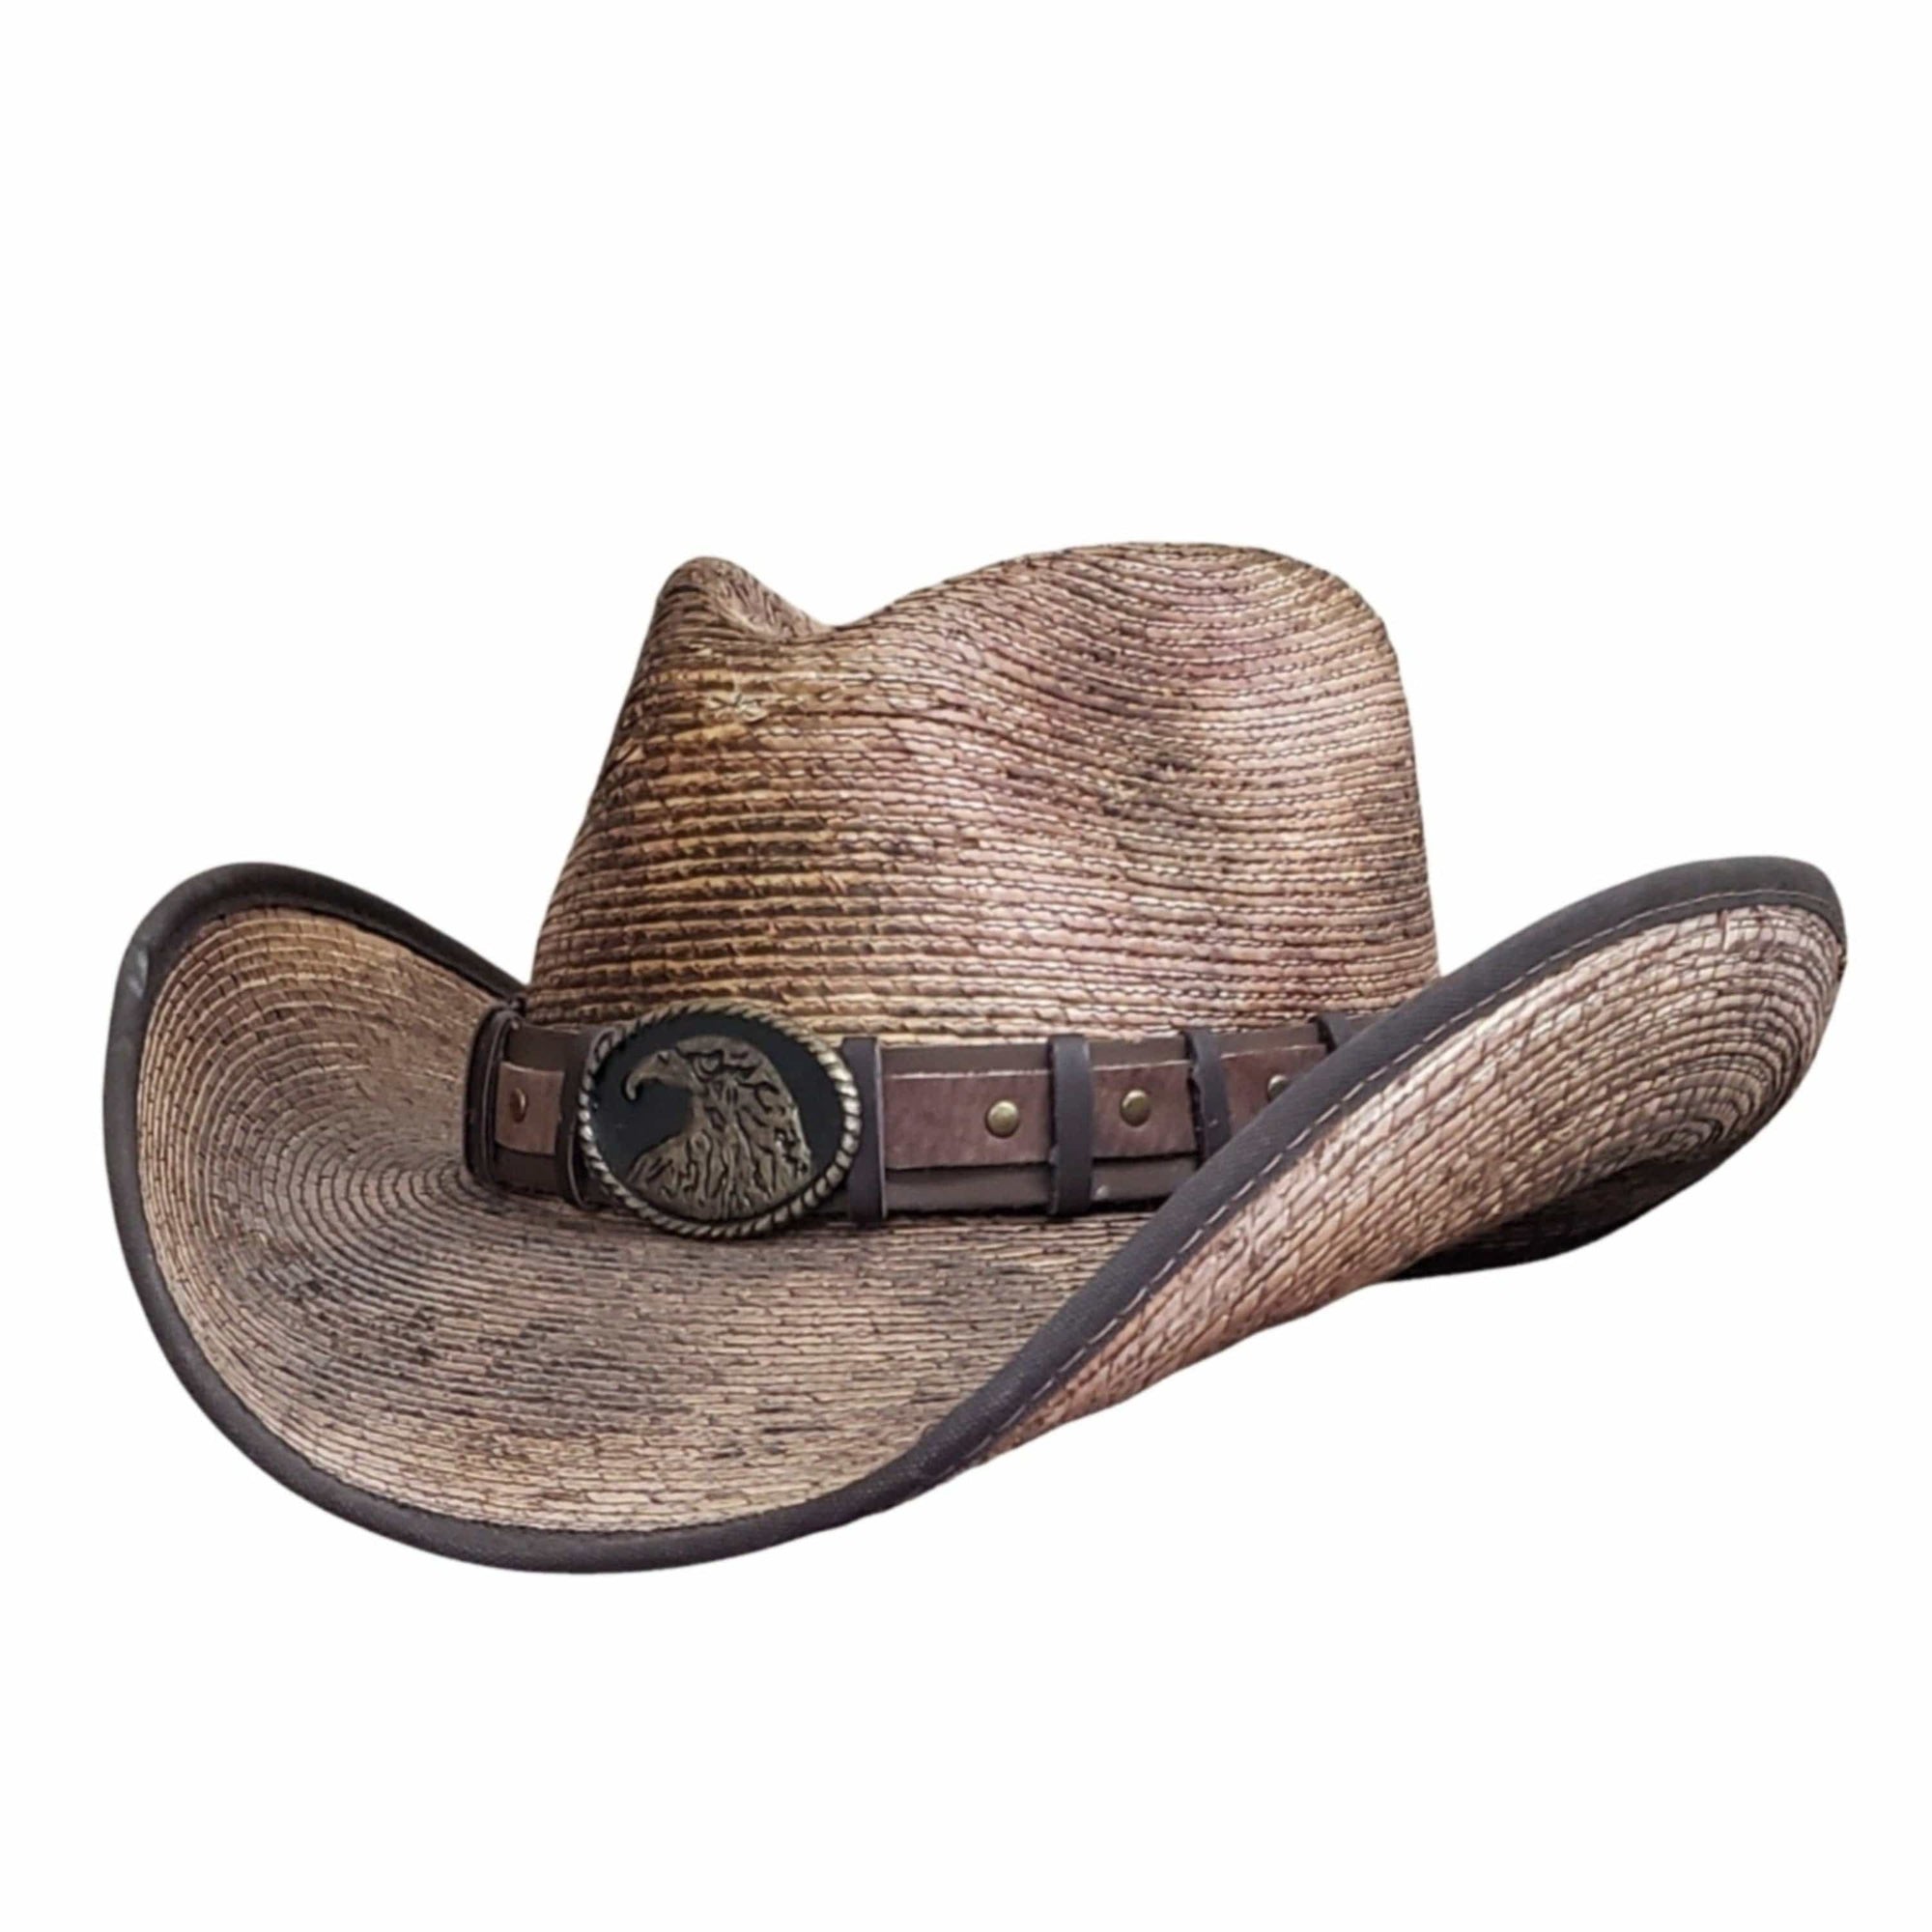 Gone Country Hats Men & Women's Hats Large  fits 7-3/8 to 7-1/2 Predator Toasted - Palm